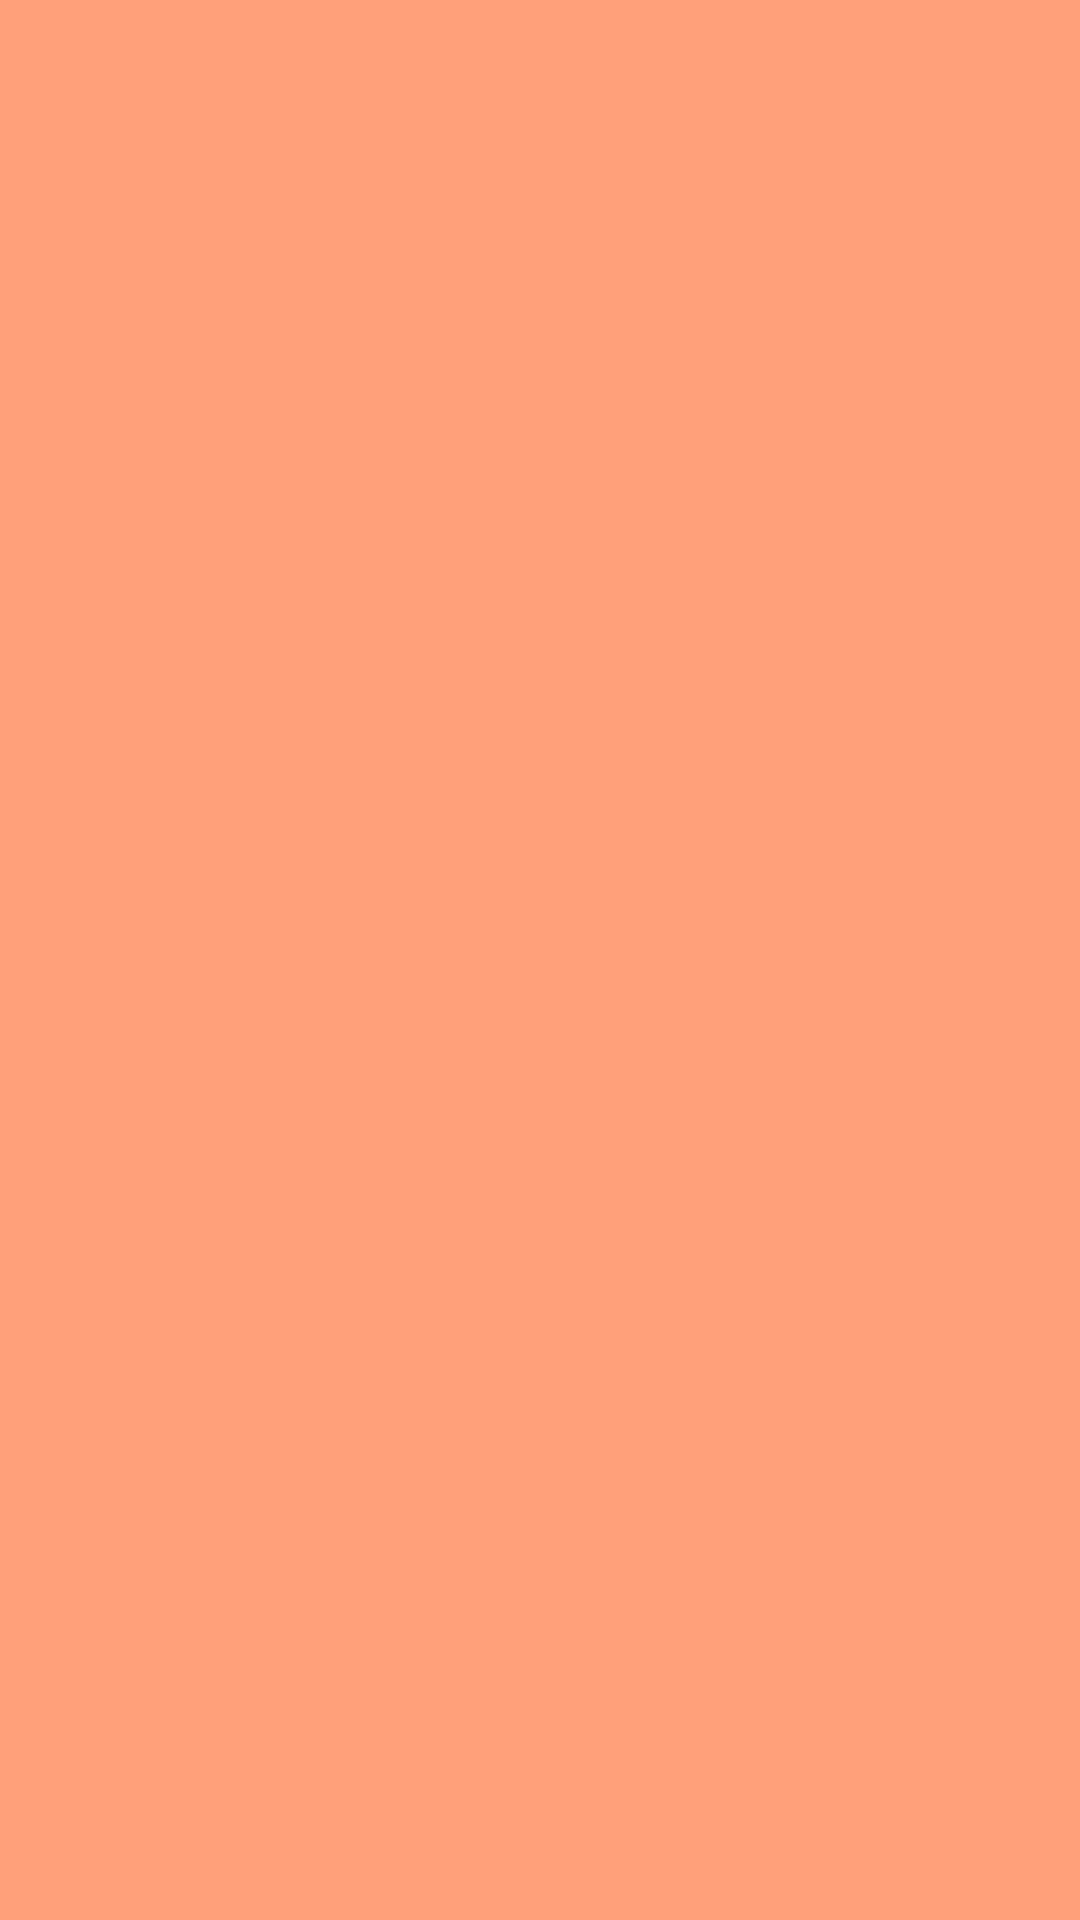 1080x1920 Light Salmon Solid Color Background